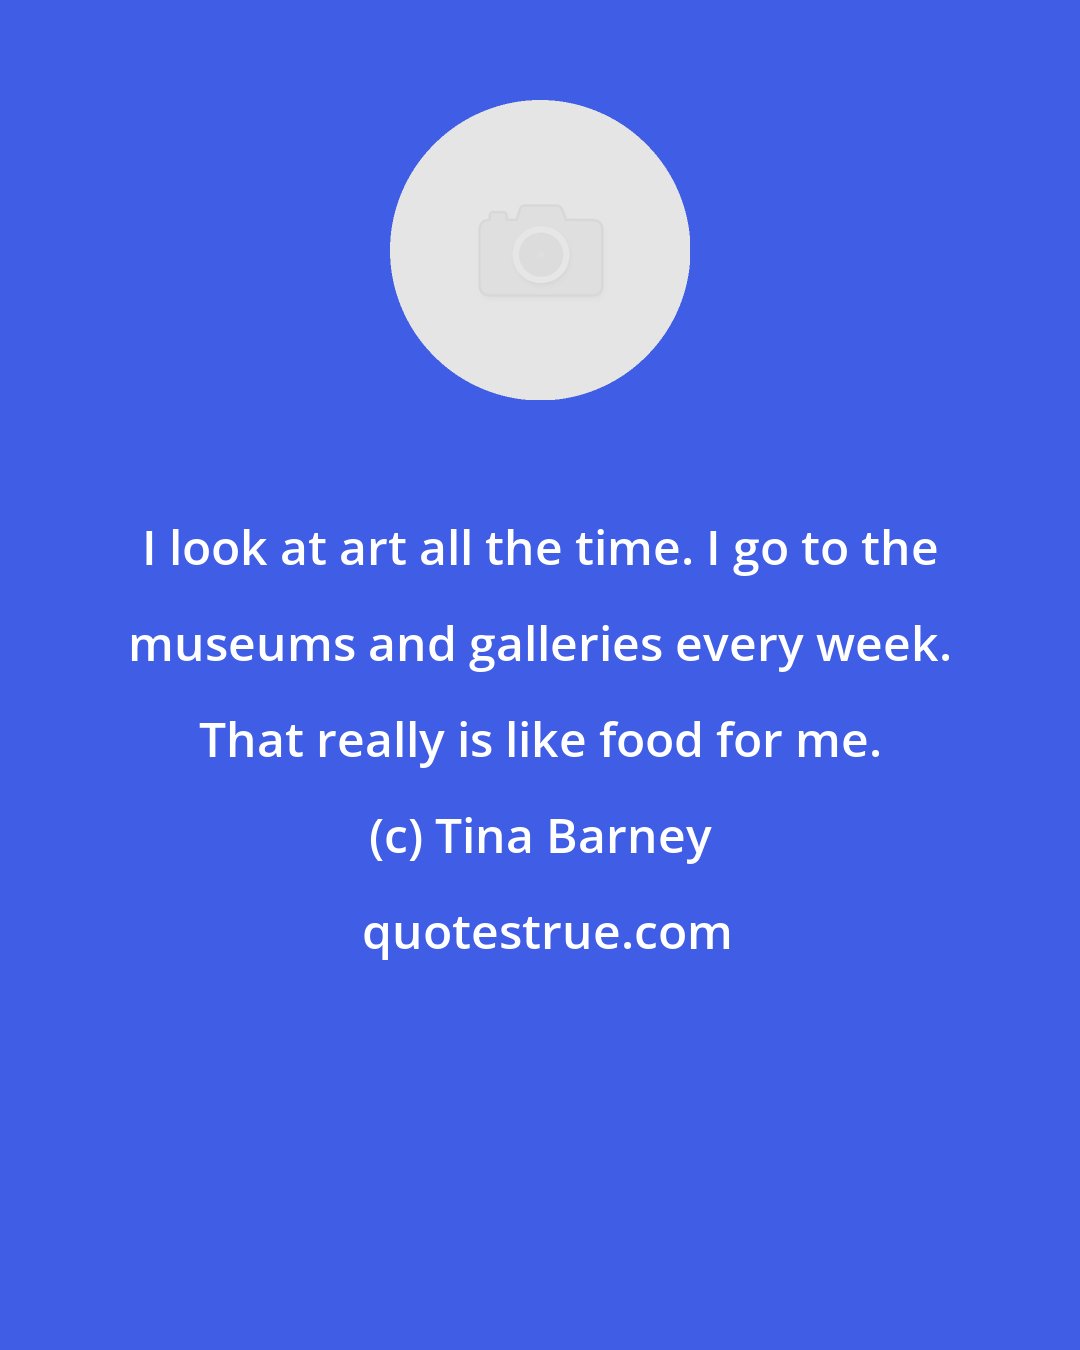 Tina Barney: I look at art all the time. I go to the museums and galleries every week. That really is like food for me.